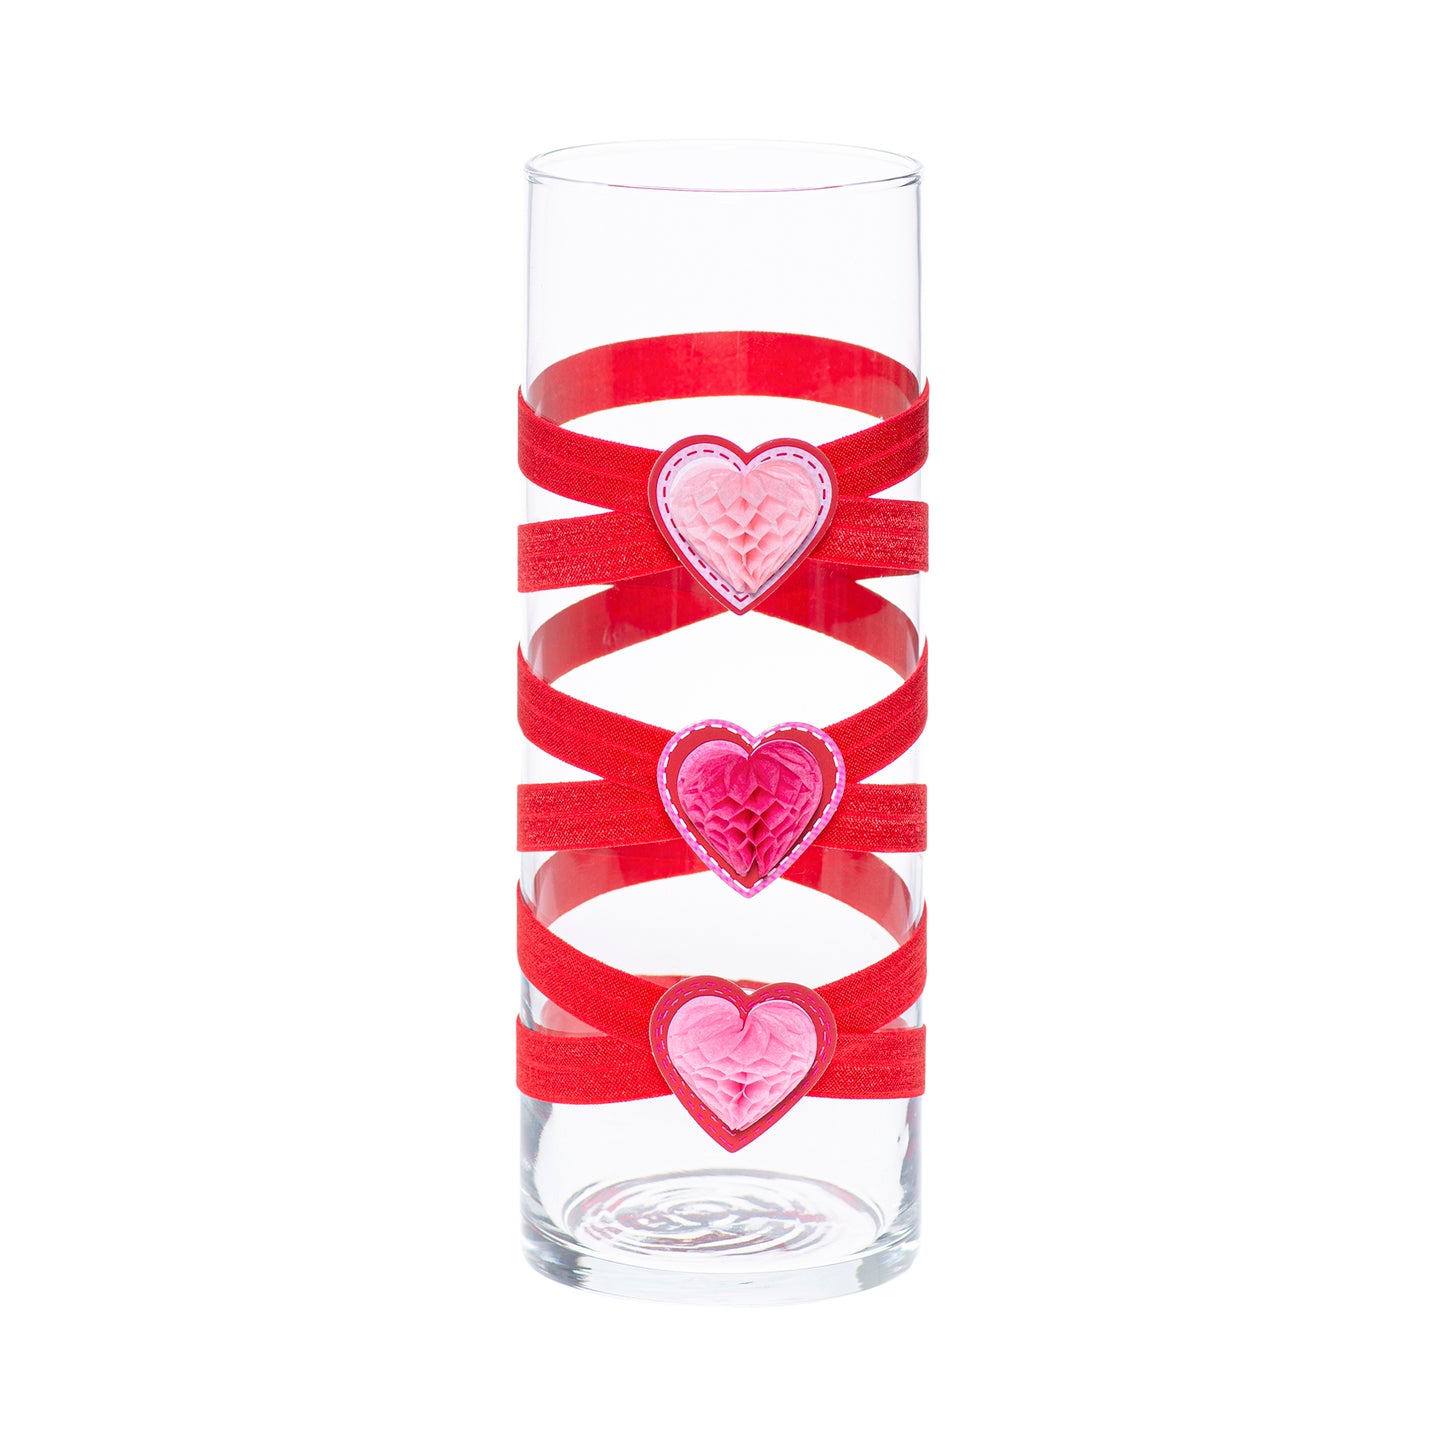 3.5" x 9.5" Vase Red 5X 5 Red White Pink Honeycomb Hearts Valentine Love Collection Complete Set